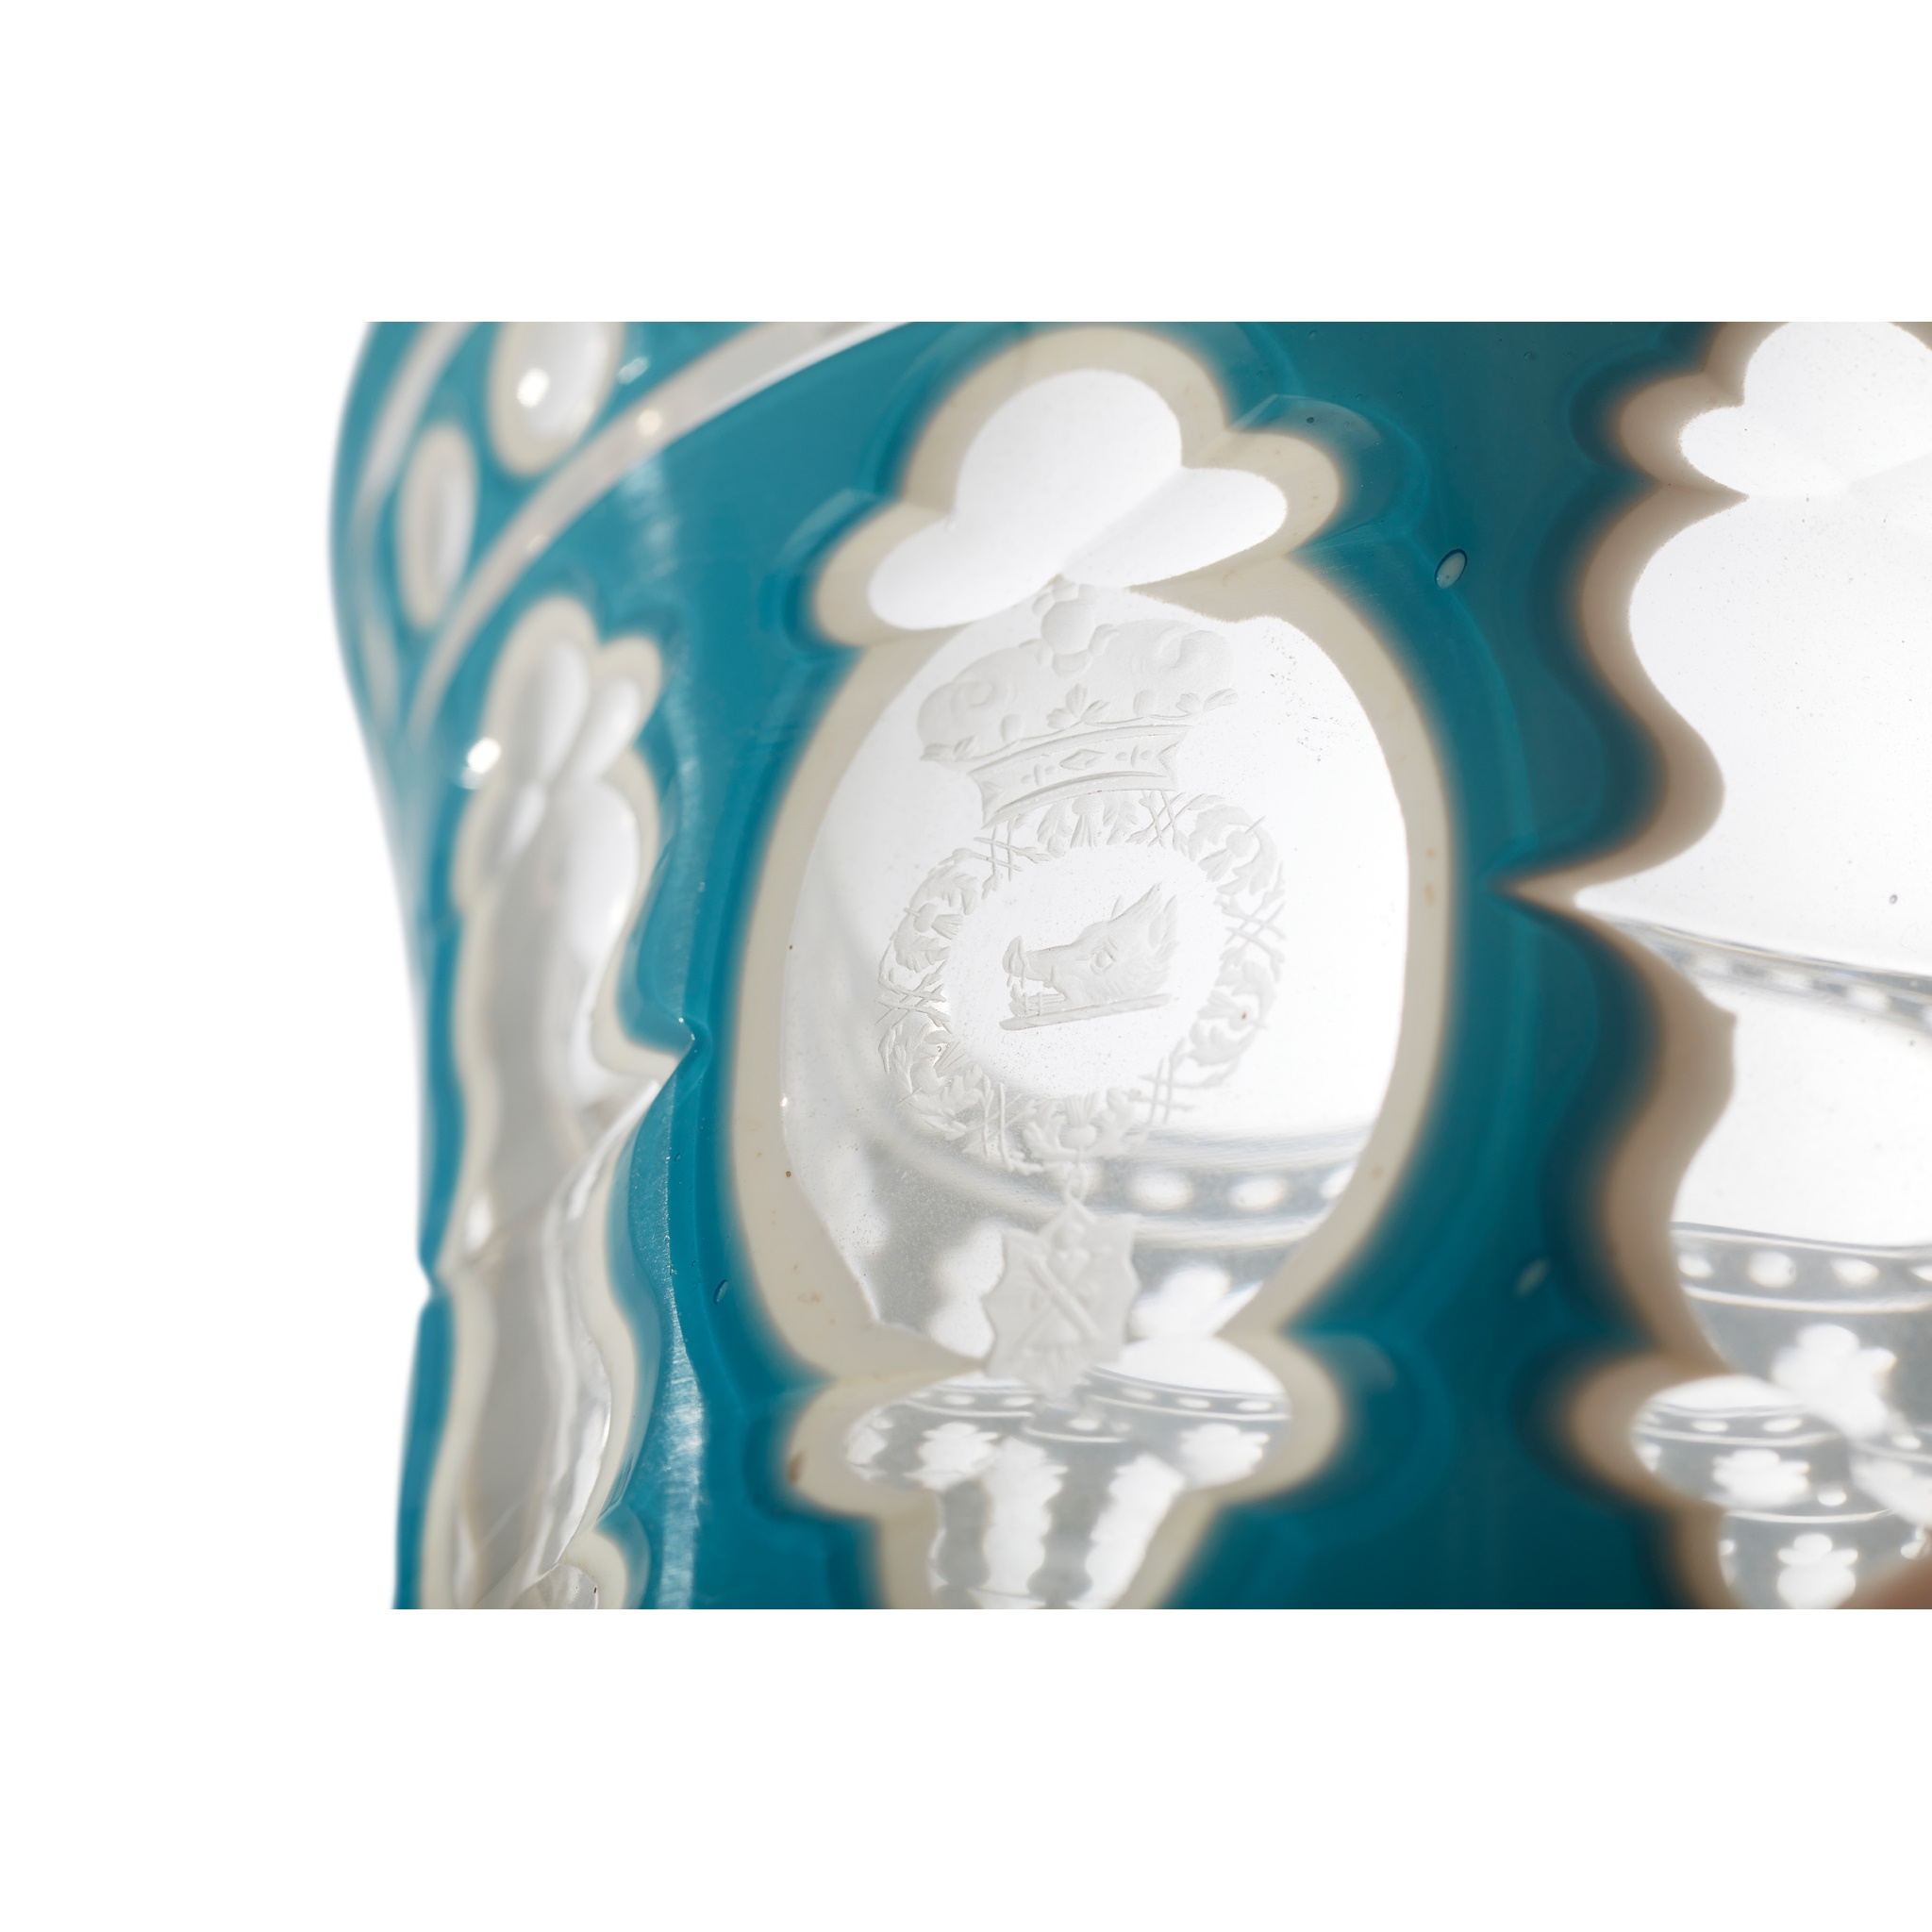 COLLECTION OF BOHEMIAN LAYERED GLASS FINGER BOWLS AND POSY BOWLS ENGRAVED WITH THE BREADALBANE - Image 3 of 4